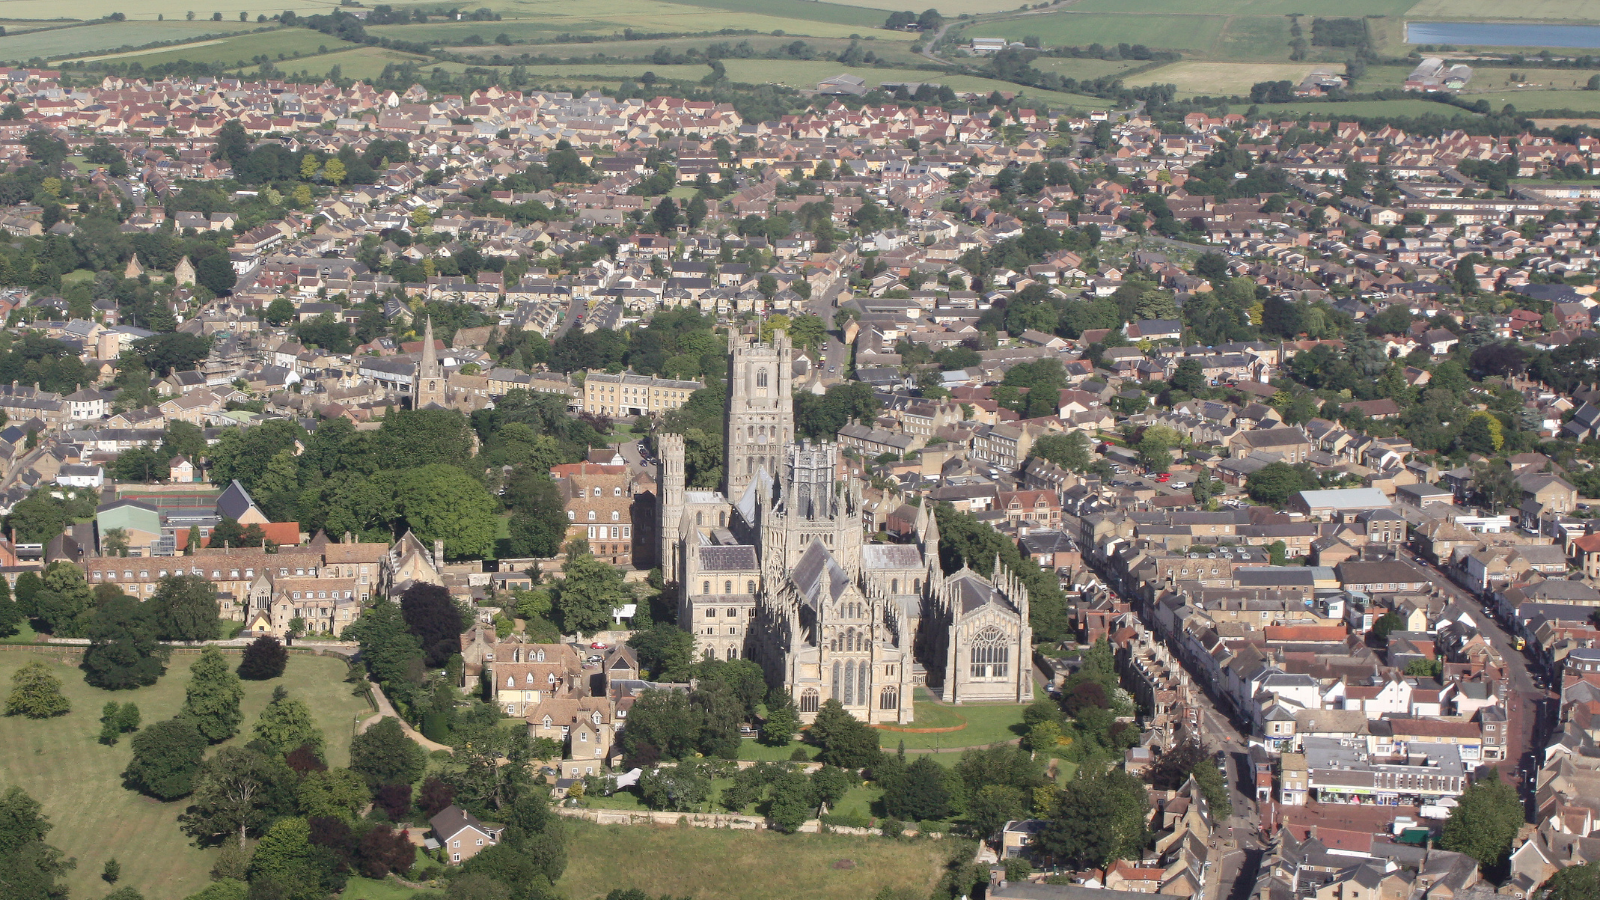 Top 8 Things to Do in Ely for Families with Kids